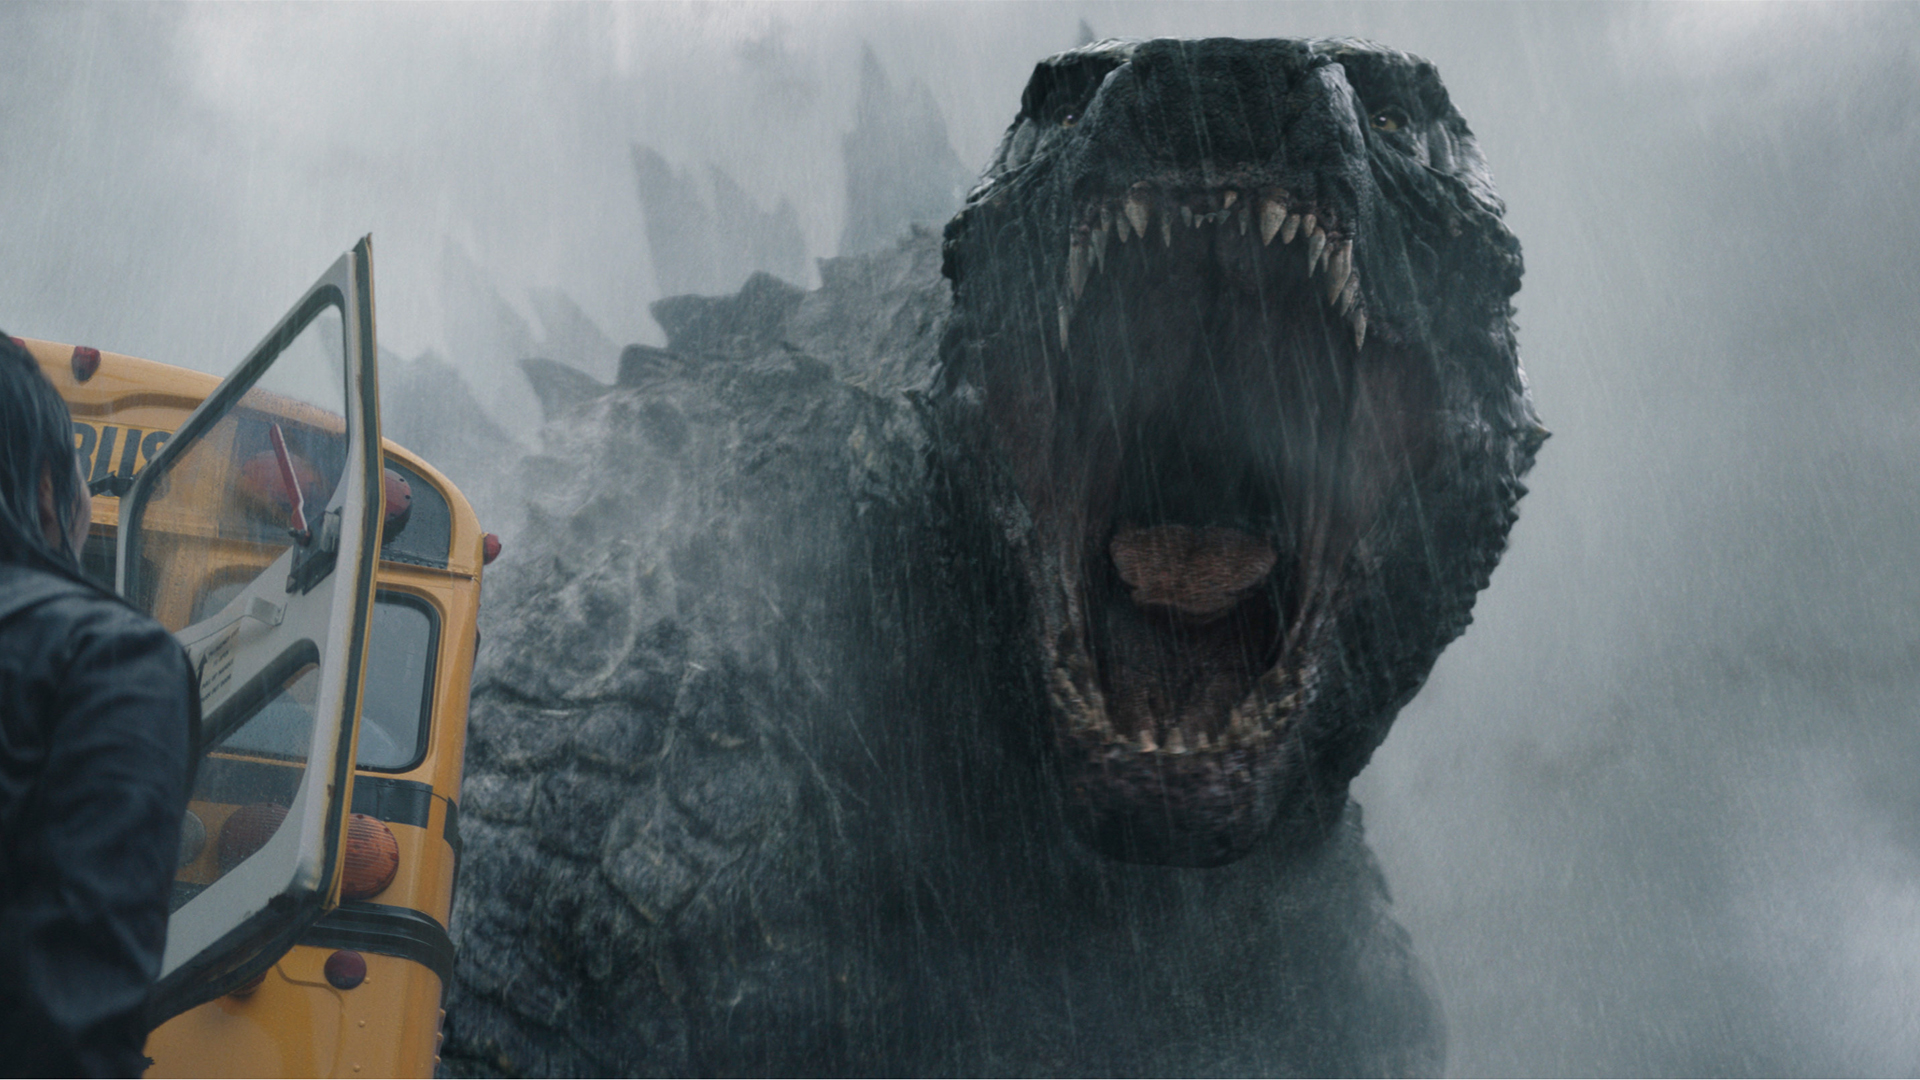 Apple's Godzilla TV show prepares to take a bite out of the competition